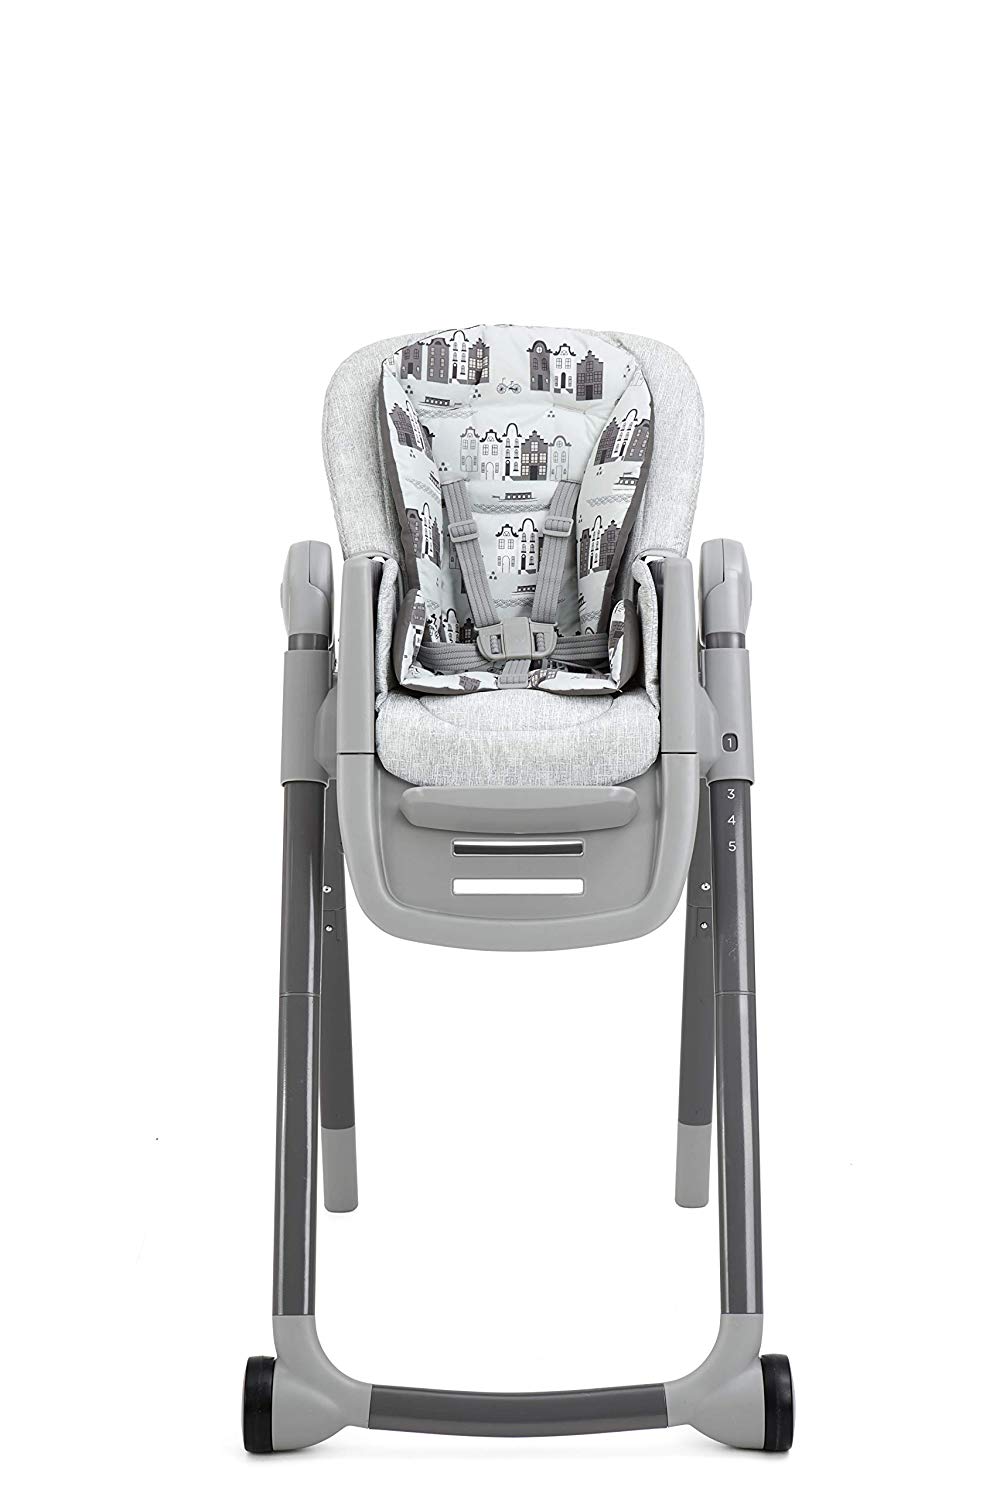 Joie H1605AAPTC000 Multiply – 2-in-1 High Chair Artist Paint Petite City